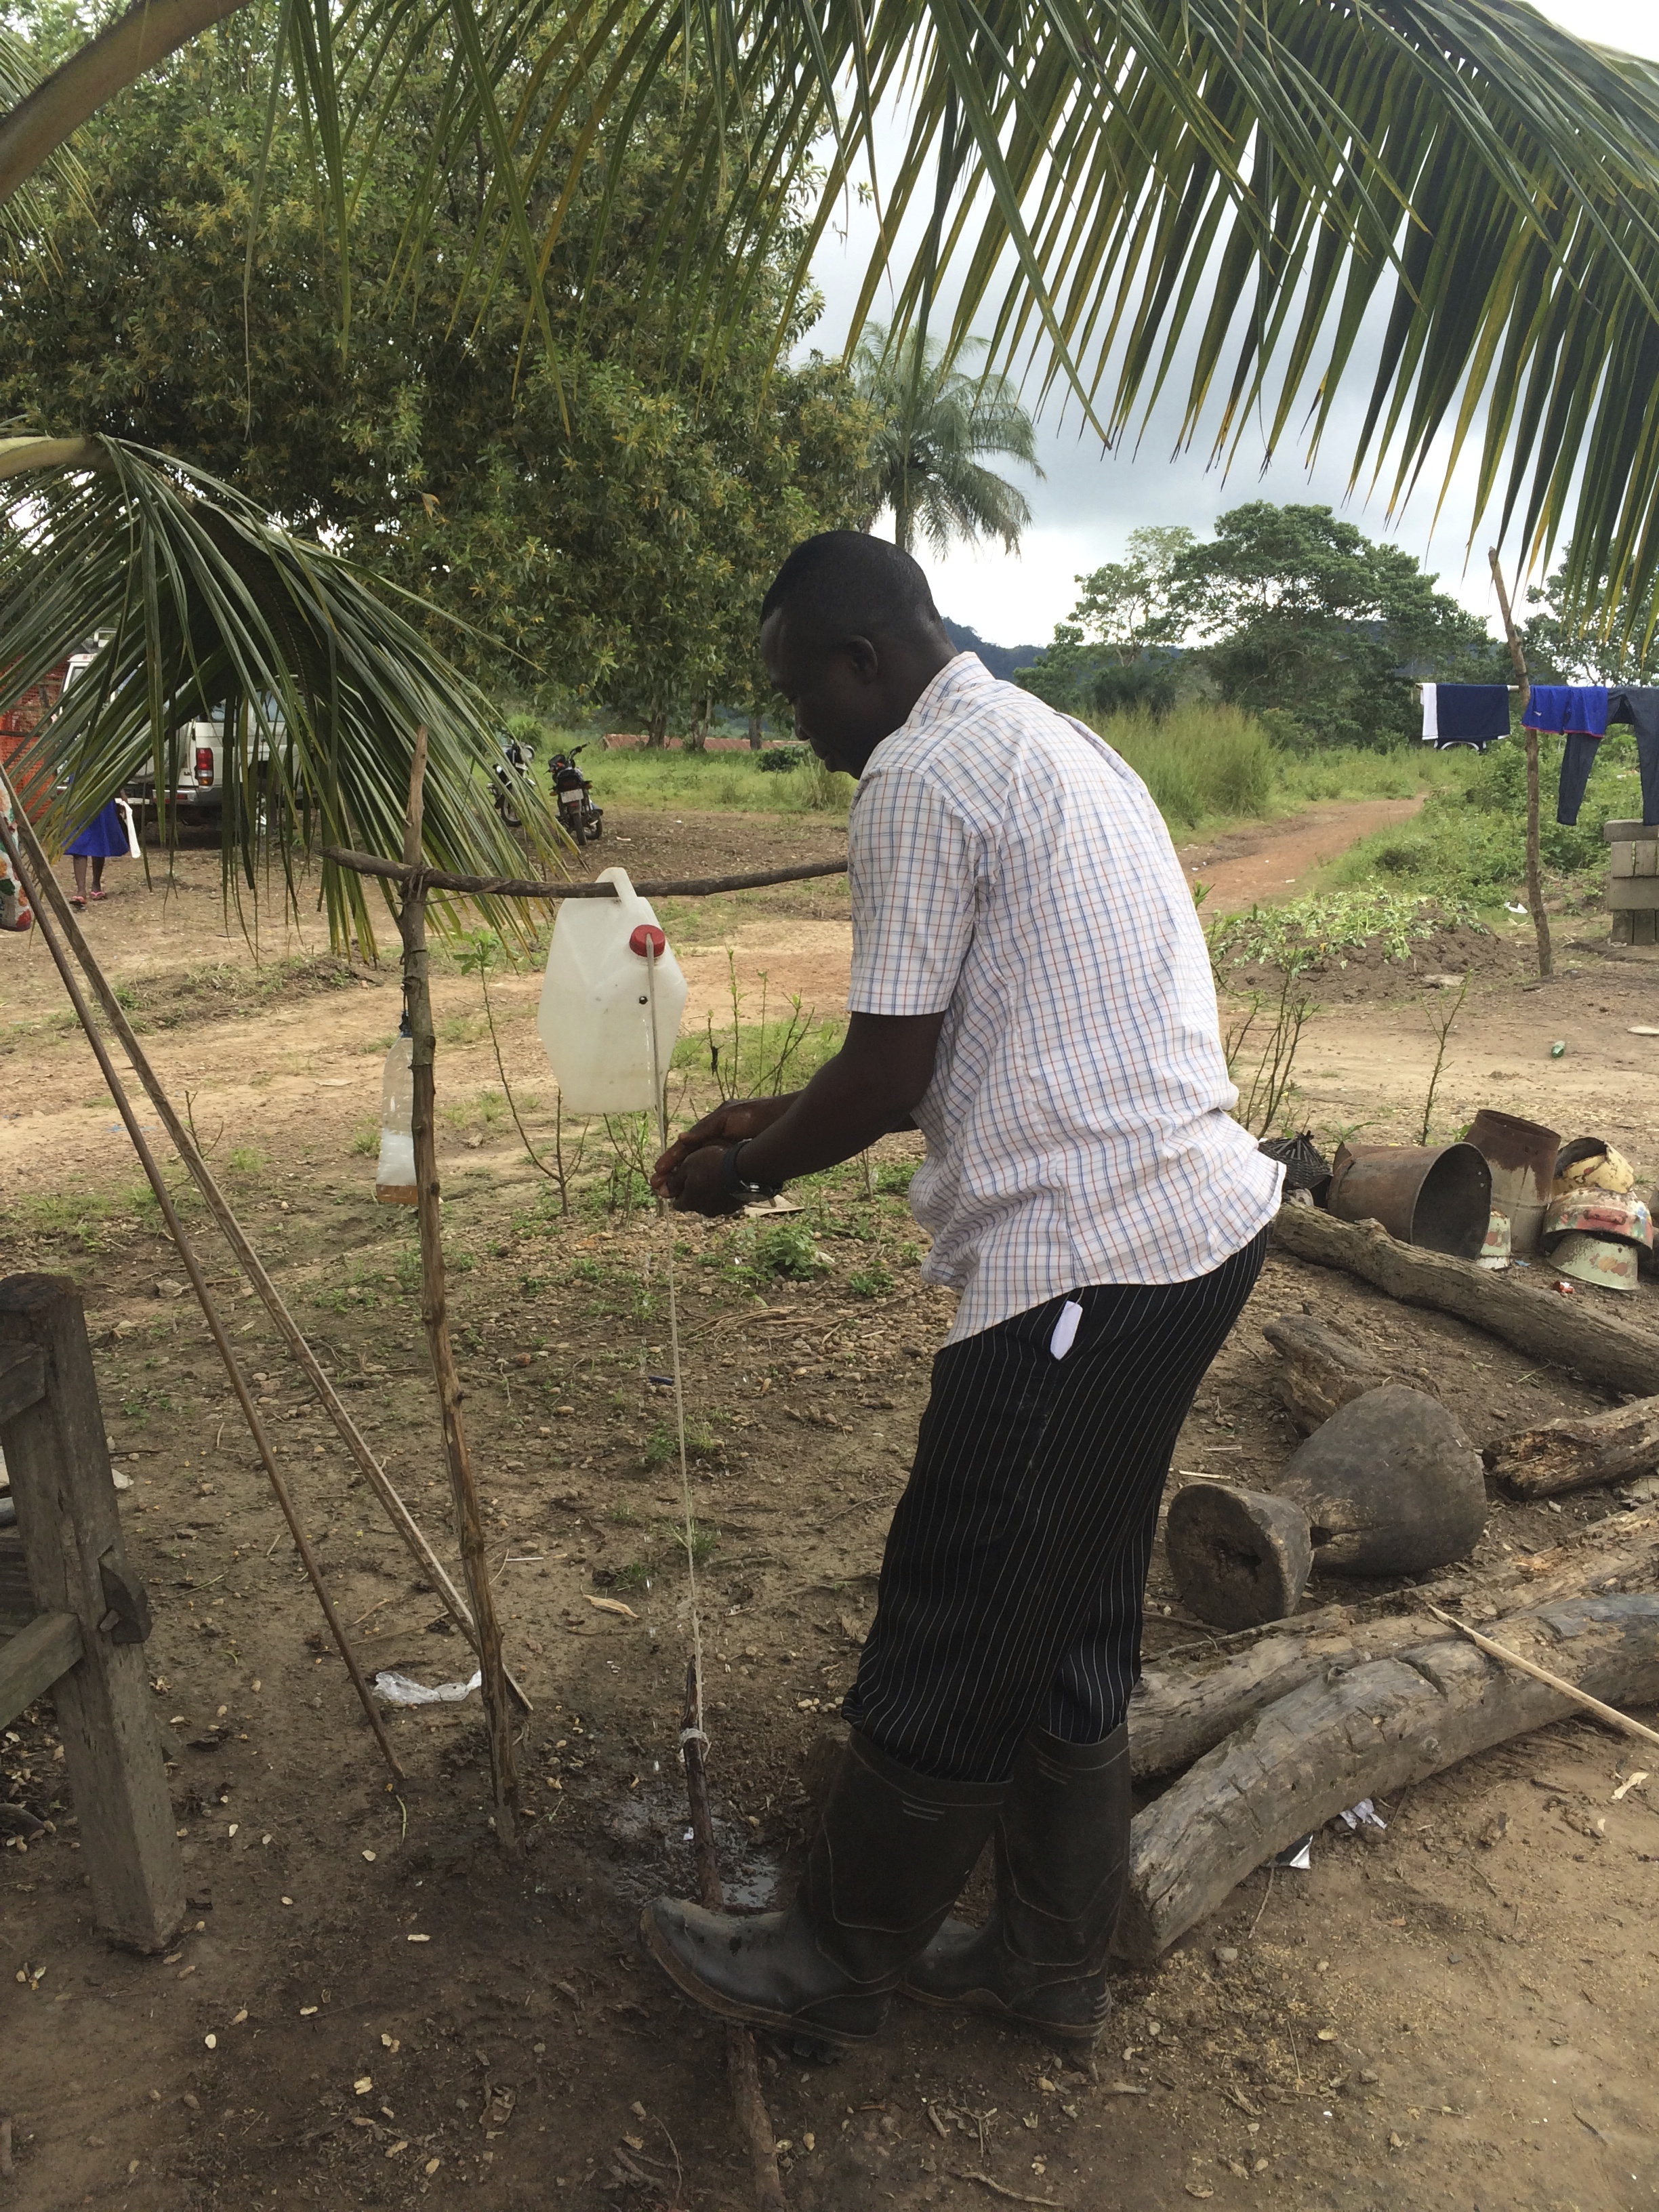 Since the EVD outbreak, SPRING found that handwashing awareness has increased within its assessment area. Concerted efforts should be made to ensure these new habits are maintained.